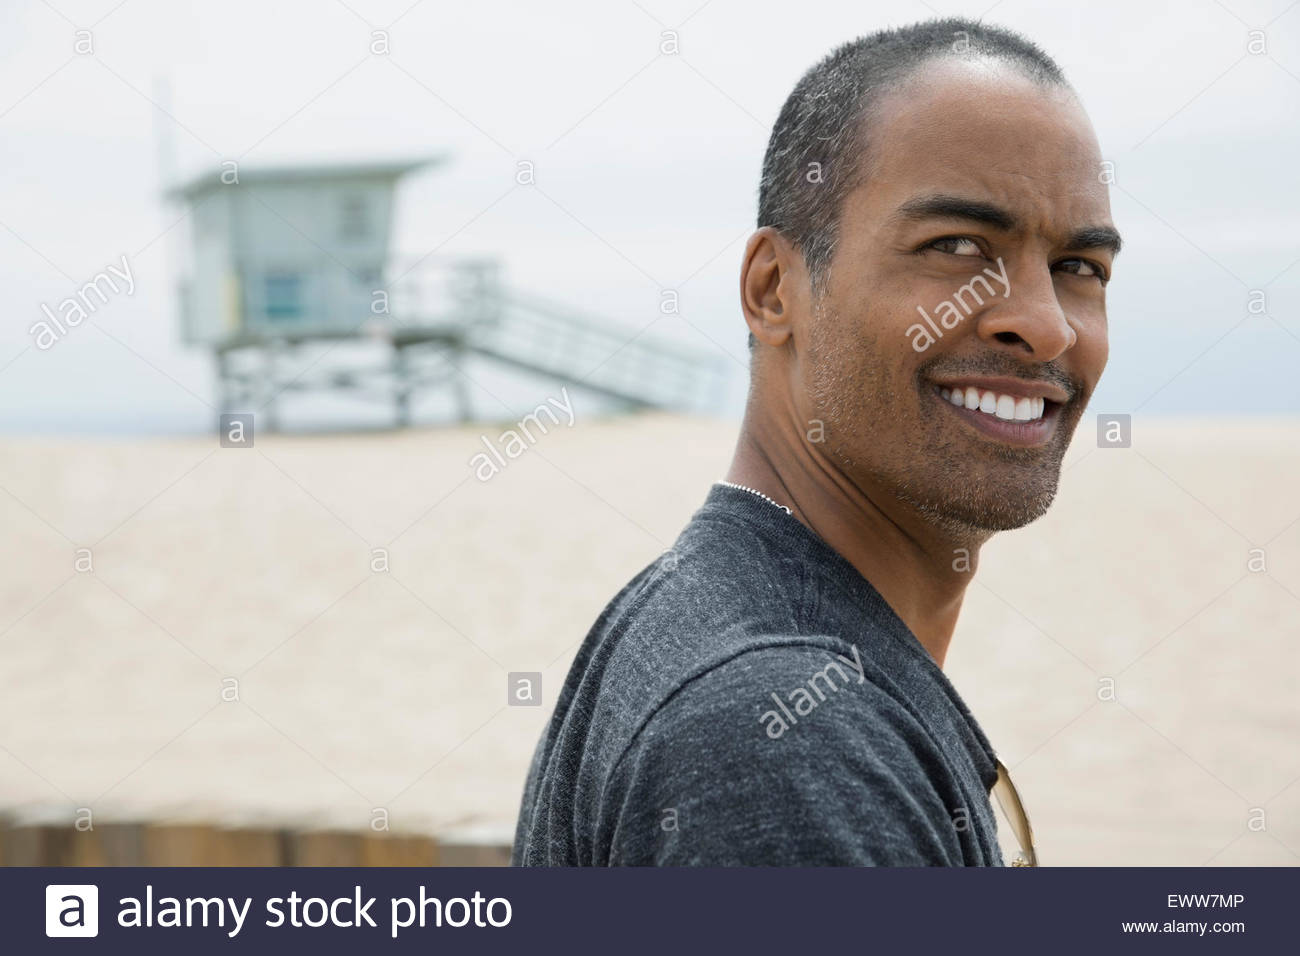 Close up portrait smiling man at beach Stock Photo